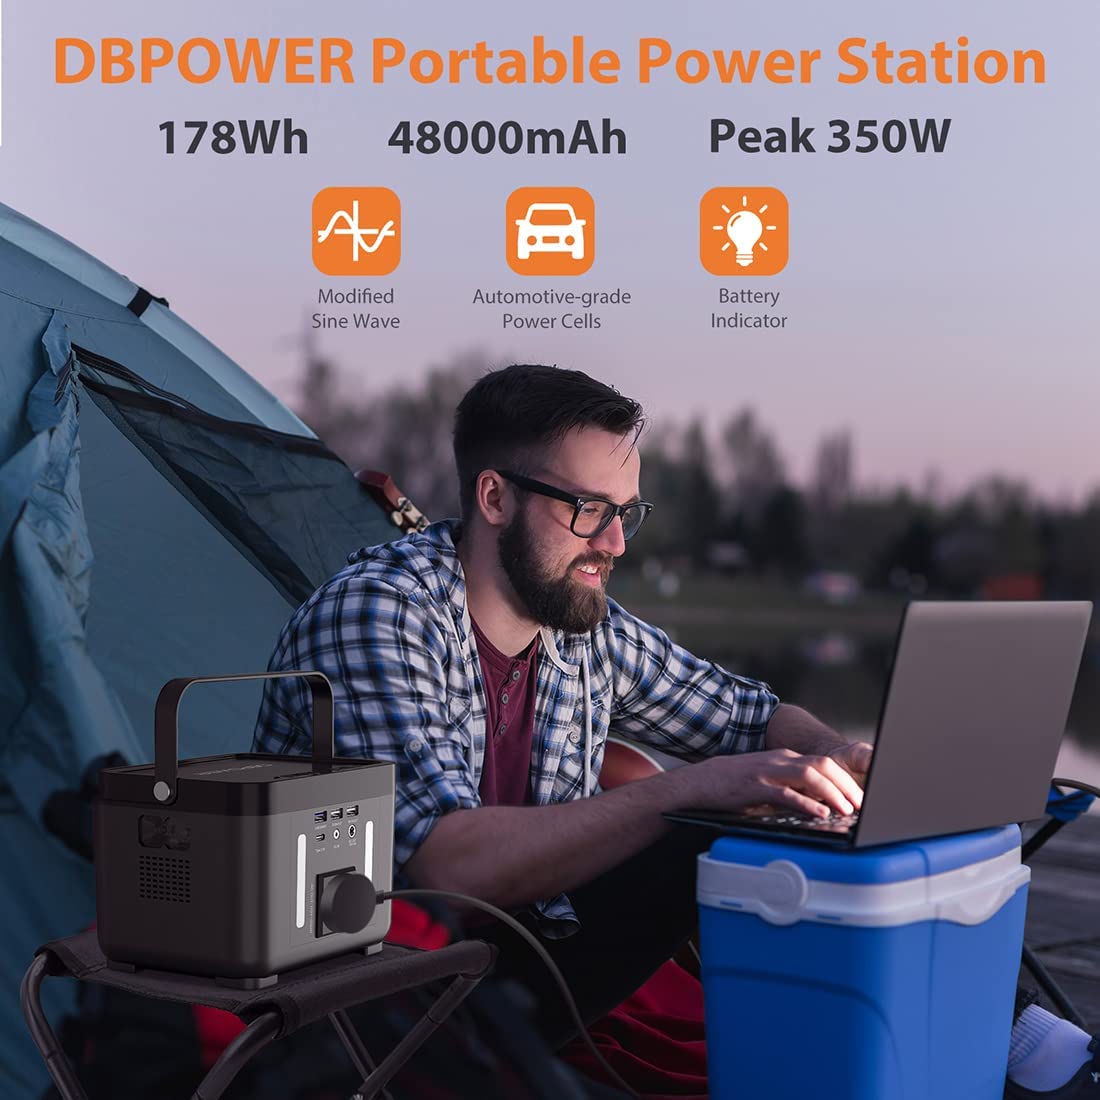 DBPOWER PW0001 178Wh/250W Battery Backup with AC Outlet Portable Power Station New